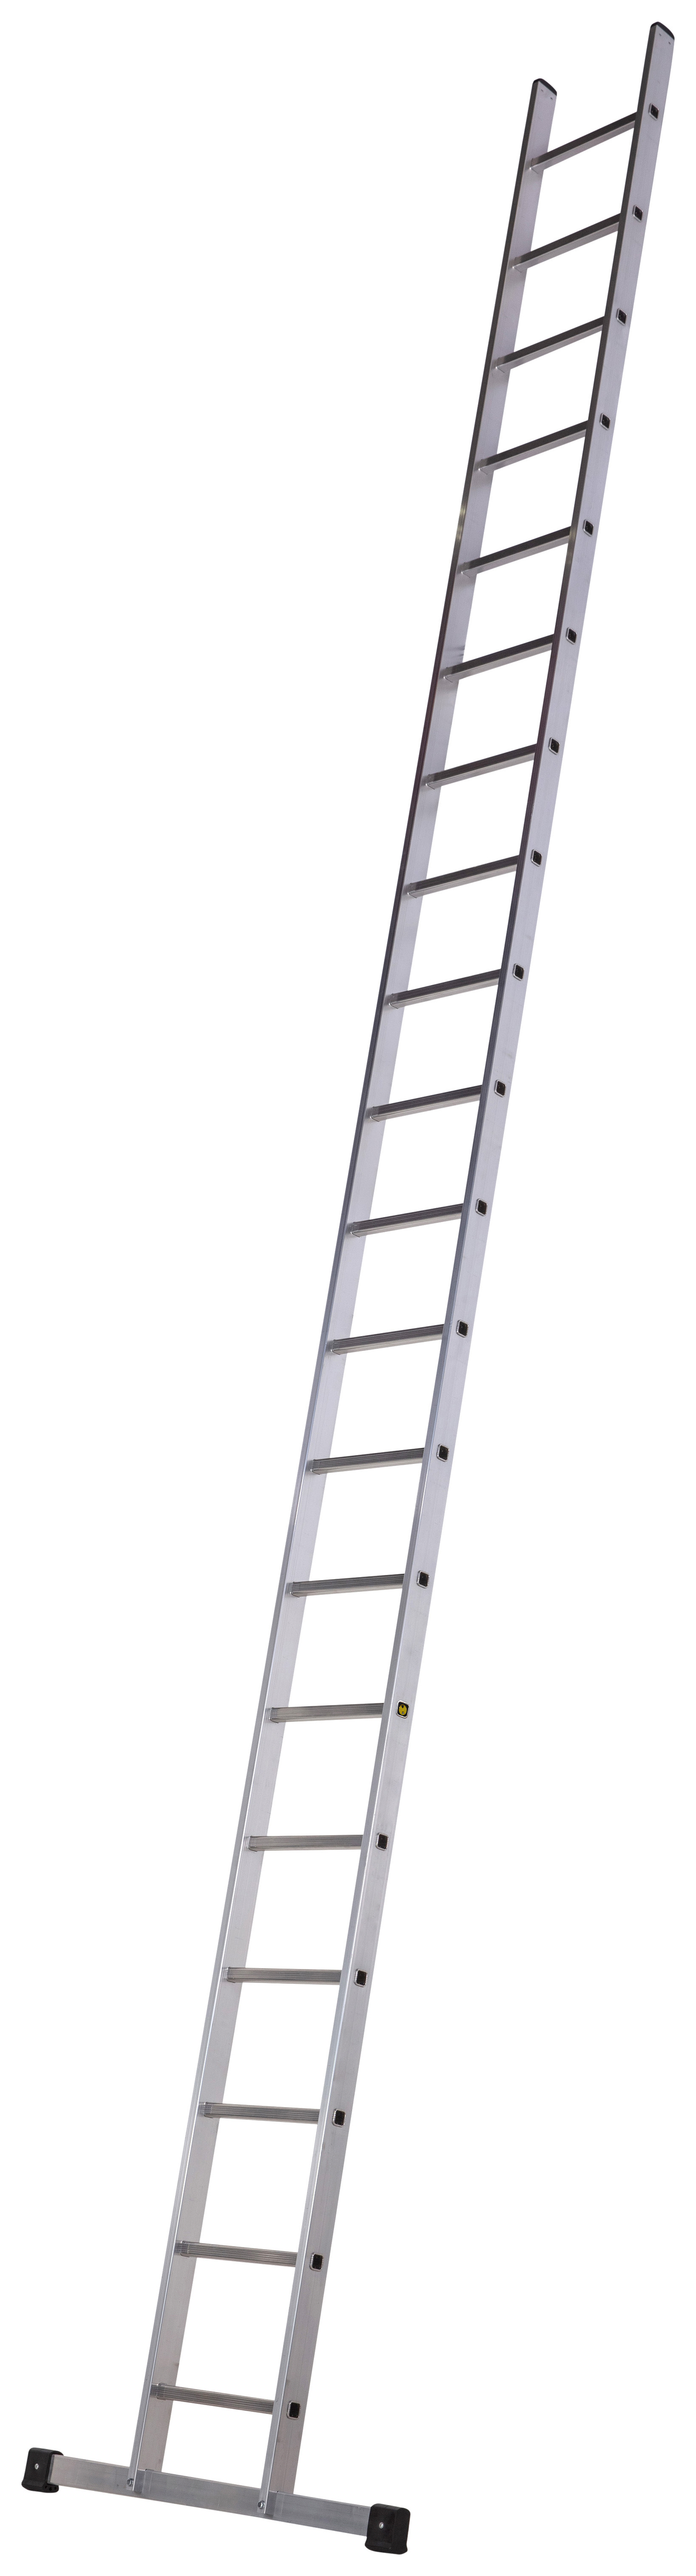 Werner Square Rung Pro Single Section Trade Ladder - 5.86m